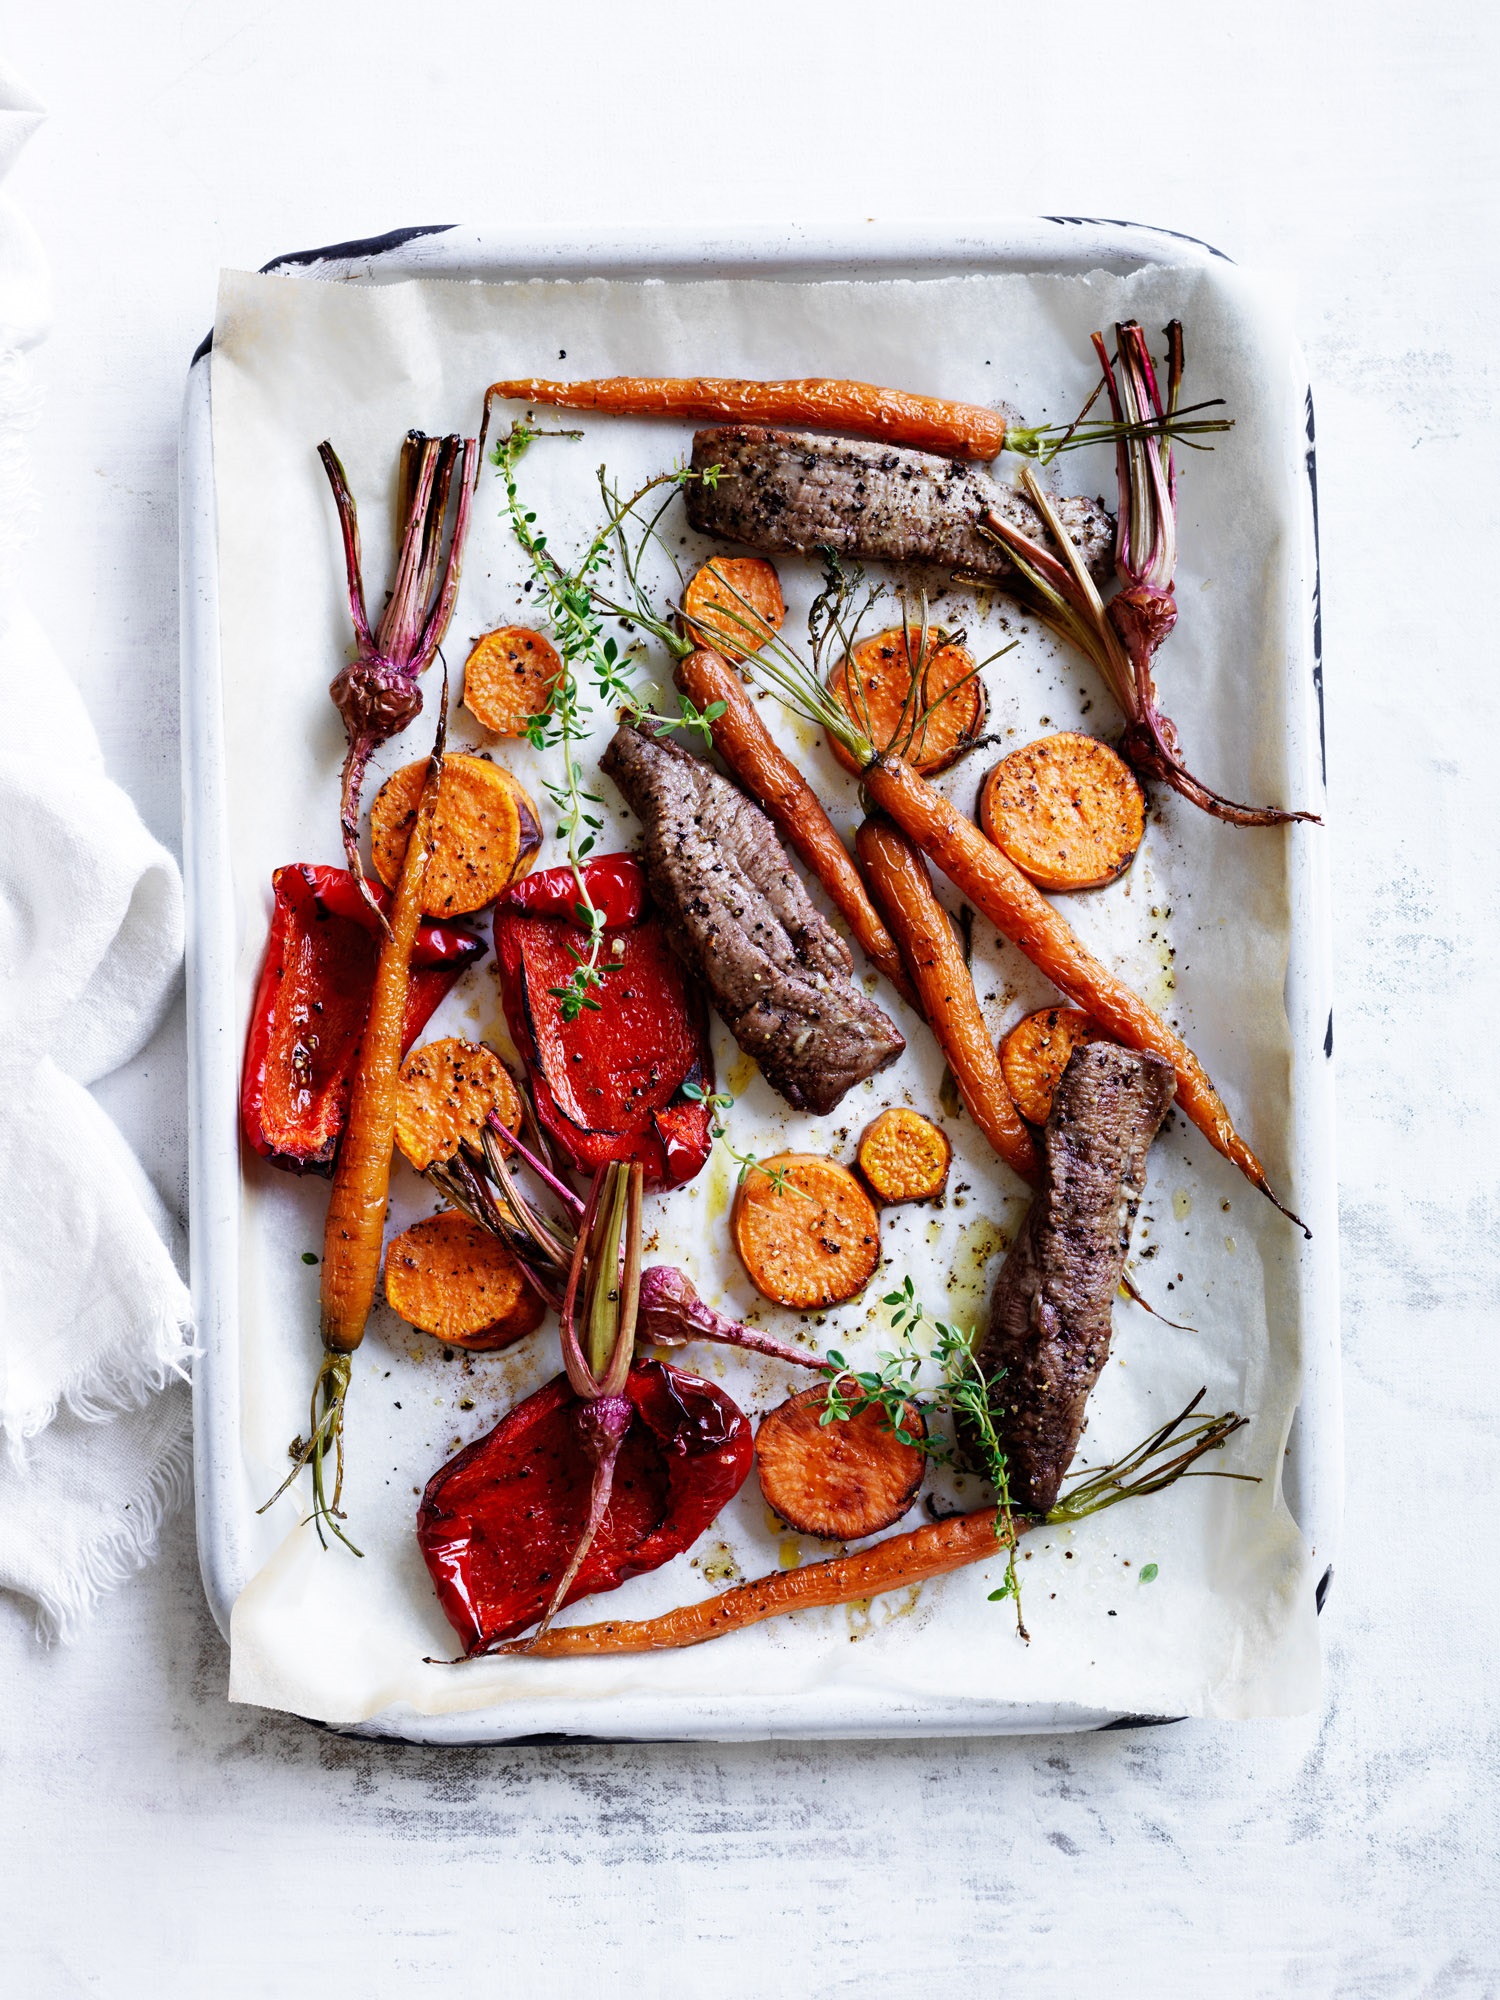 SLOW-ROASTED VEGETABLES WITH LAMB